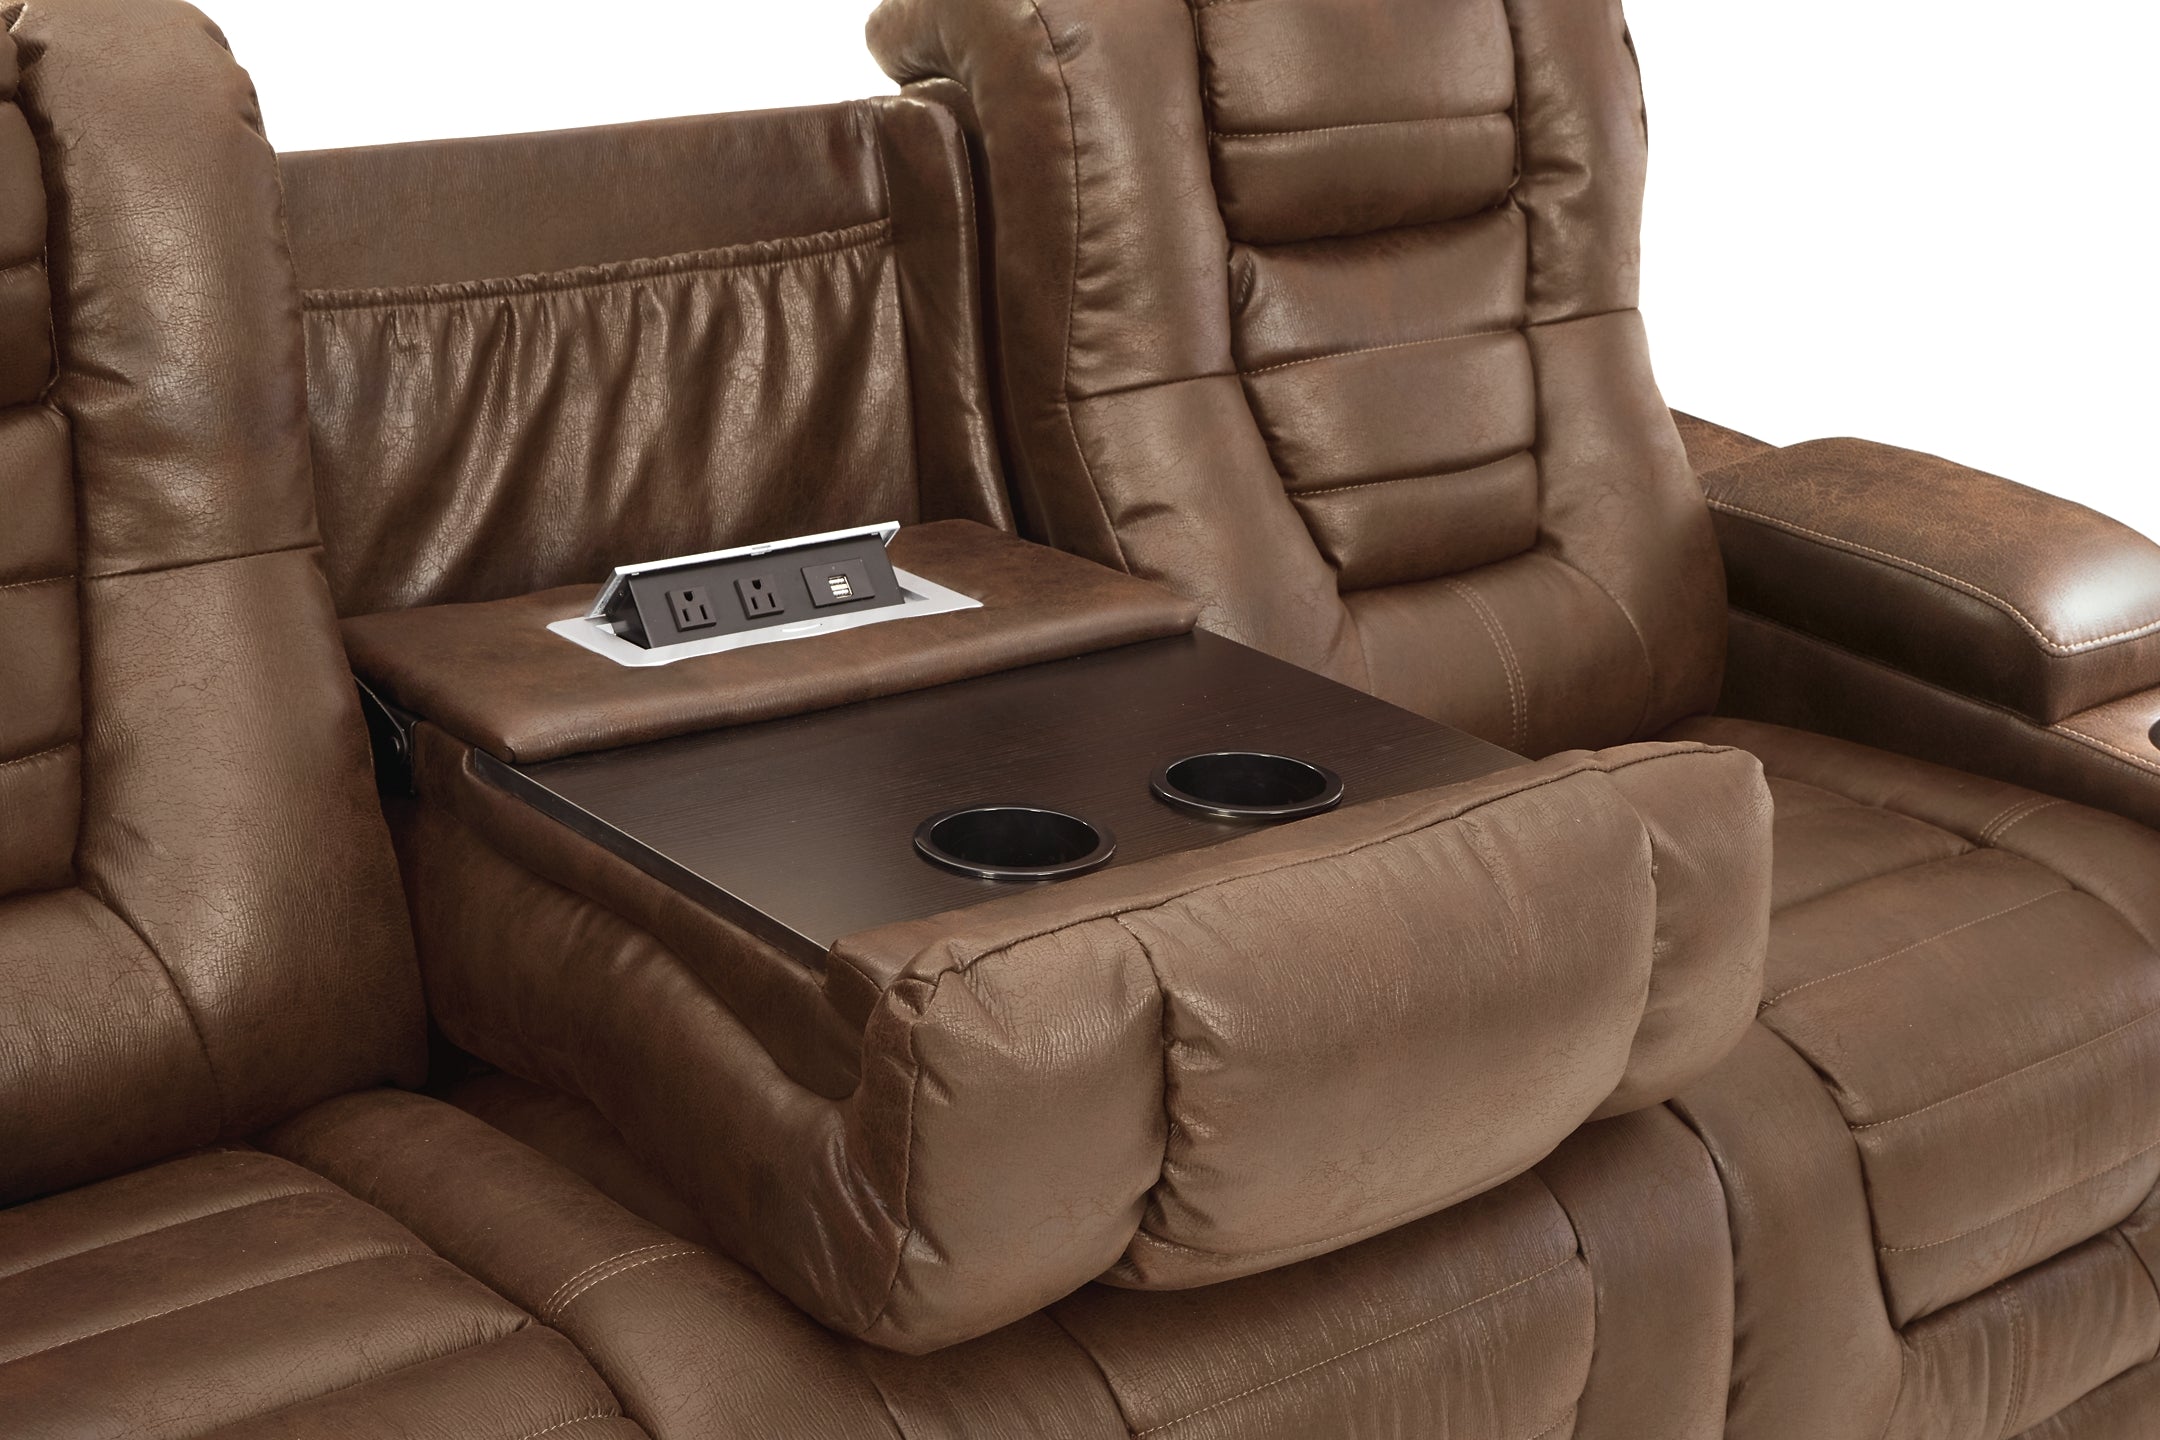 Owner's Box Power Reclining Sofa and Loveseat